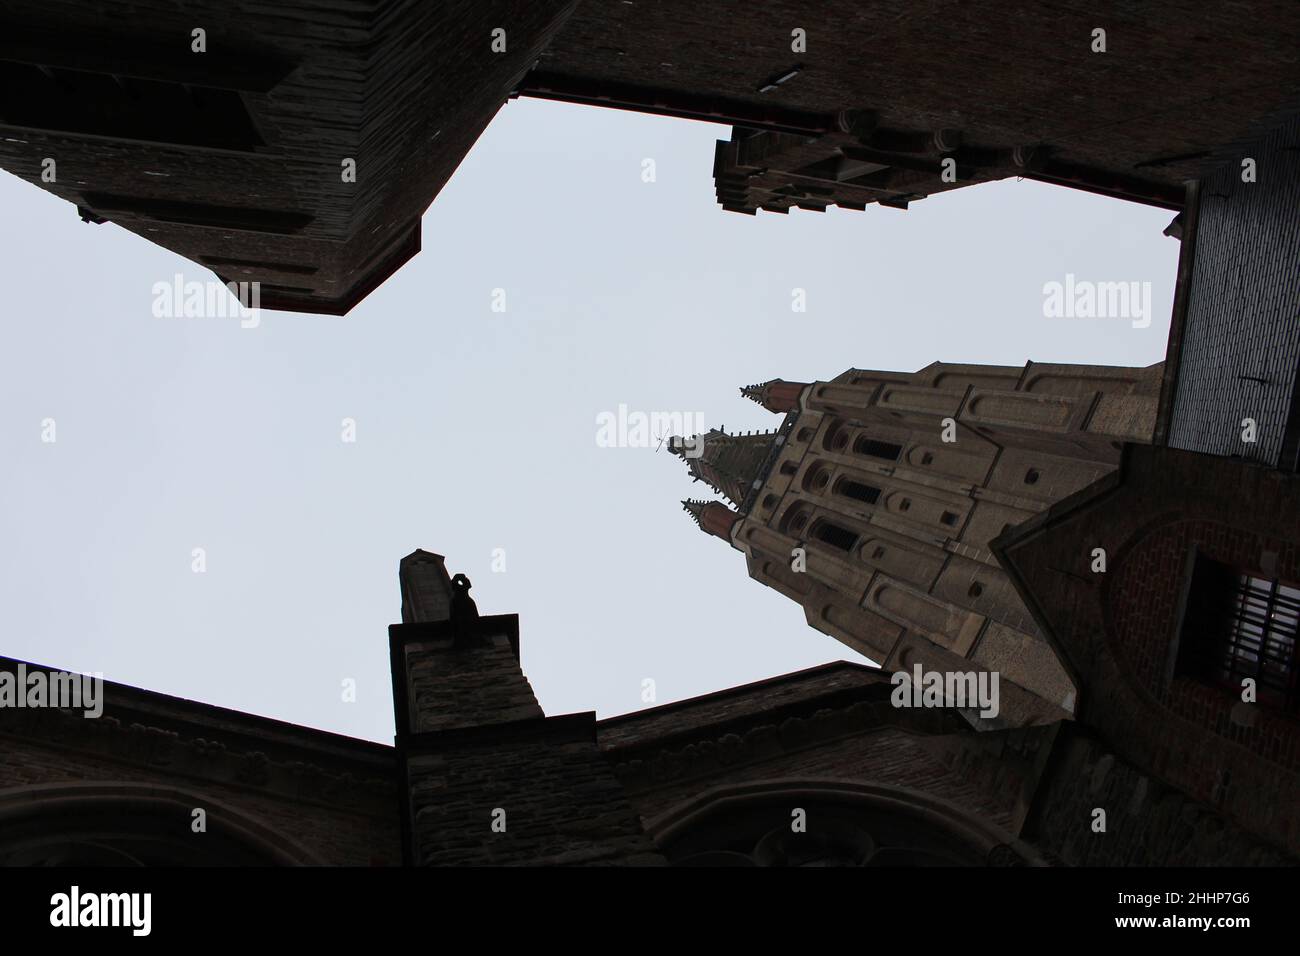 Looking up through medieval buildings at the steeple of the Church of Our Lady (Bruges, Belgium). Bruges skyline. Abstract city view. Claustrophobic. Stock Photo